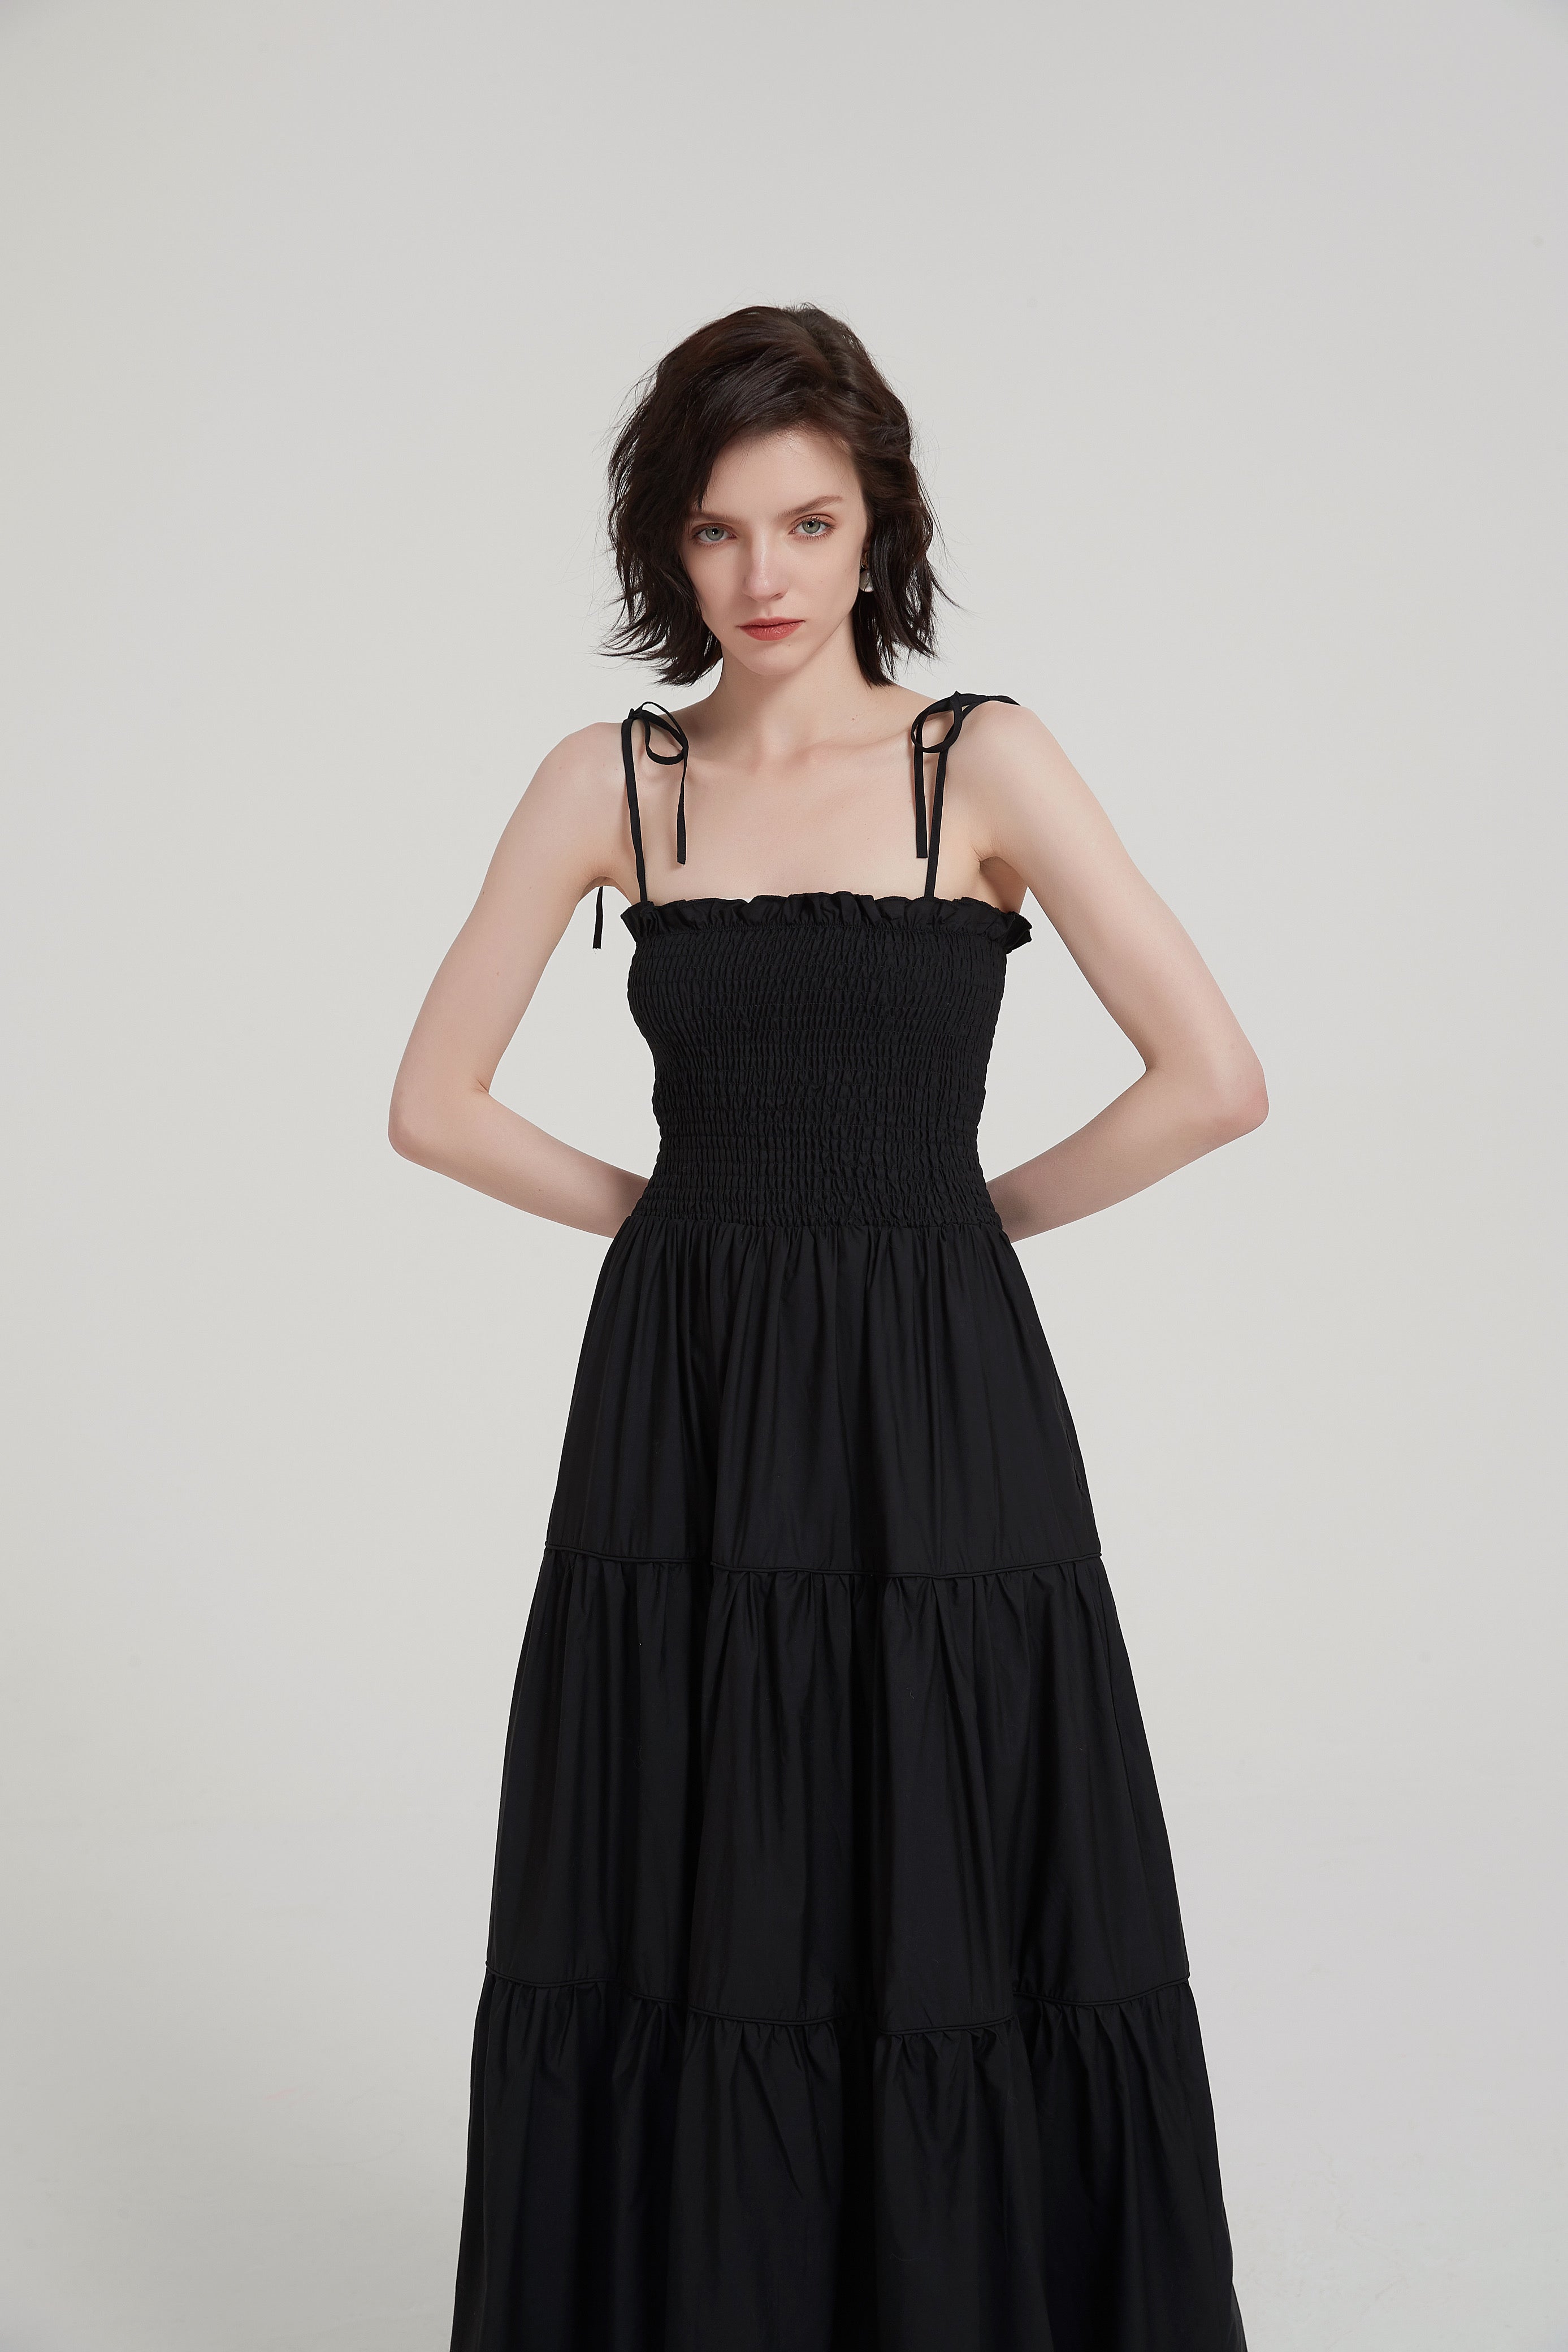 A Ruffled Dress: Staud Rylie Tiered Nylon Maxi Dress, If You're Going to a  Black-Tie Event, These 13 Styles Fit the Dress Code